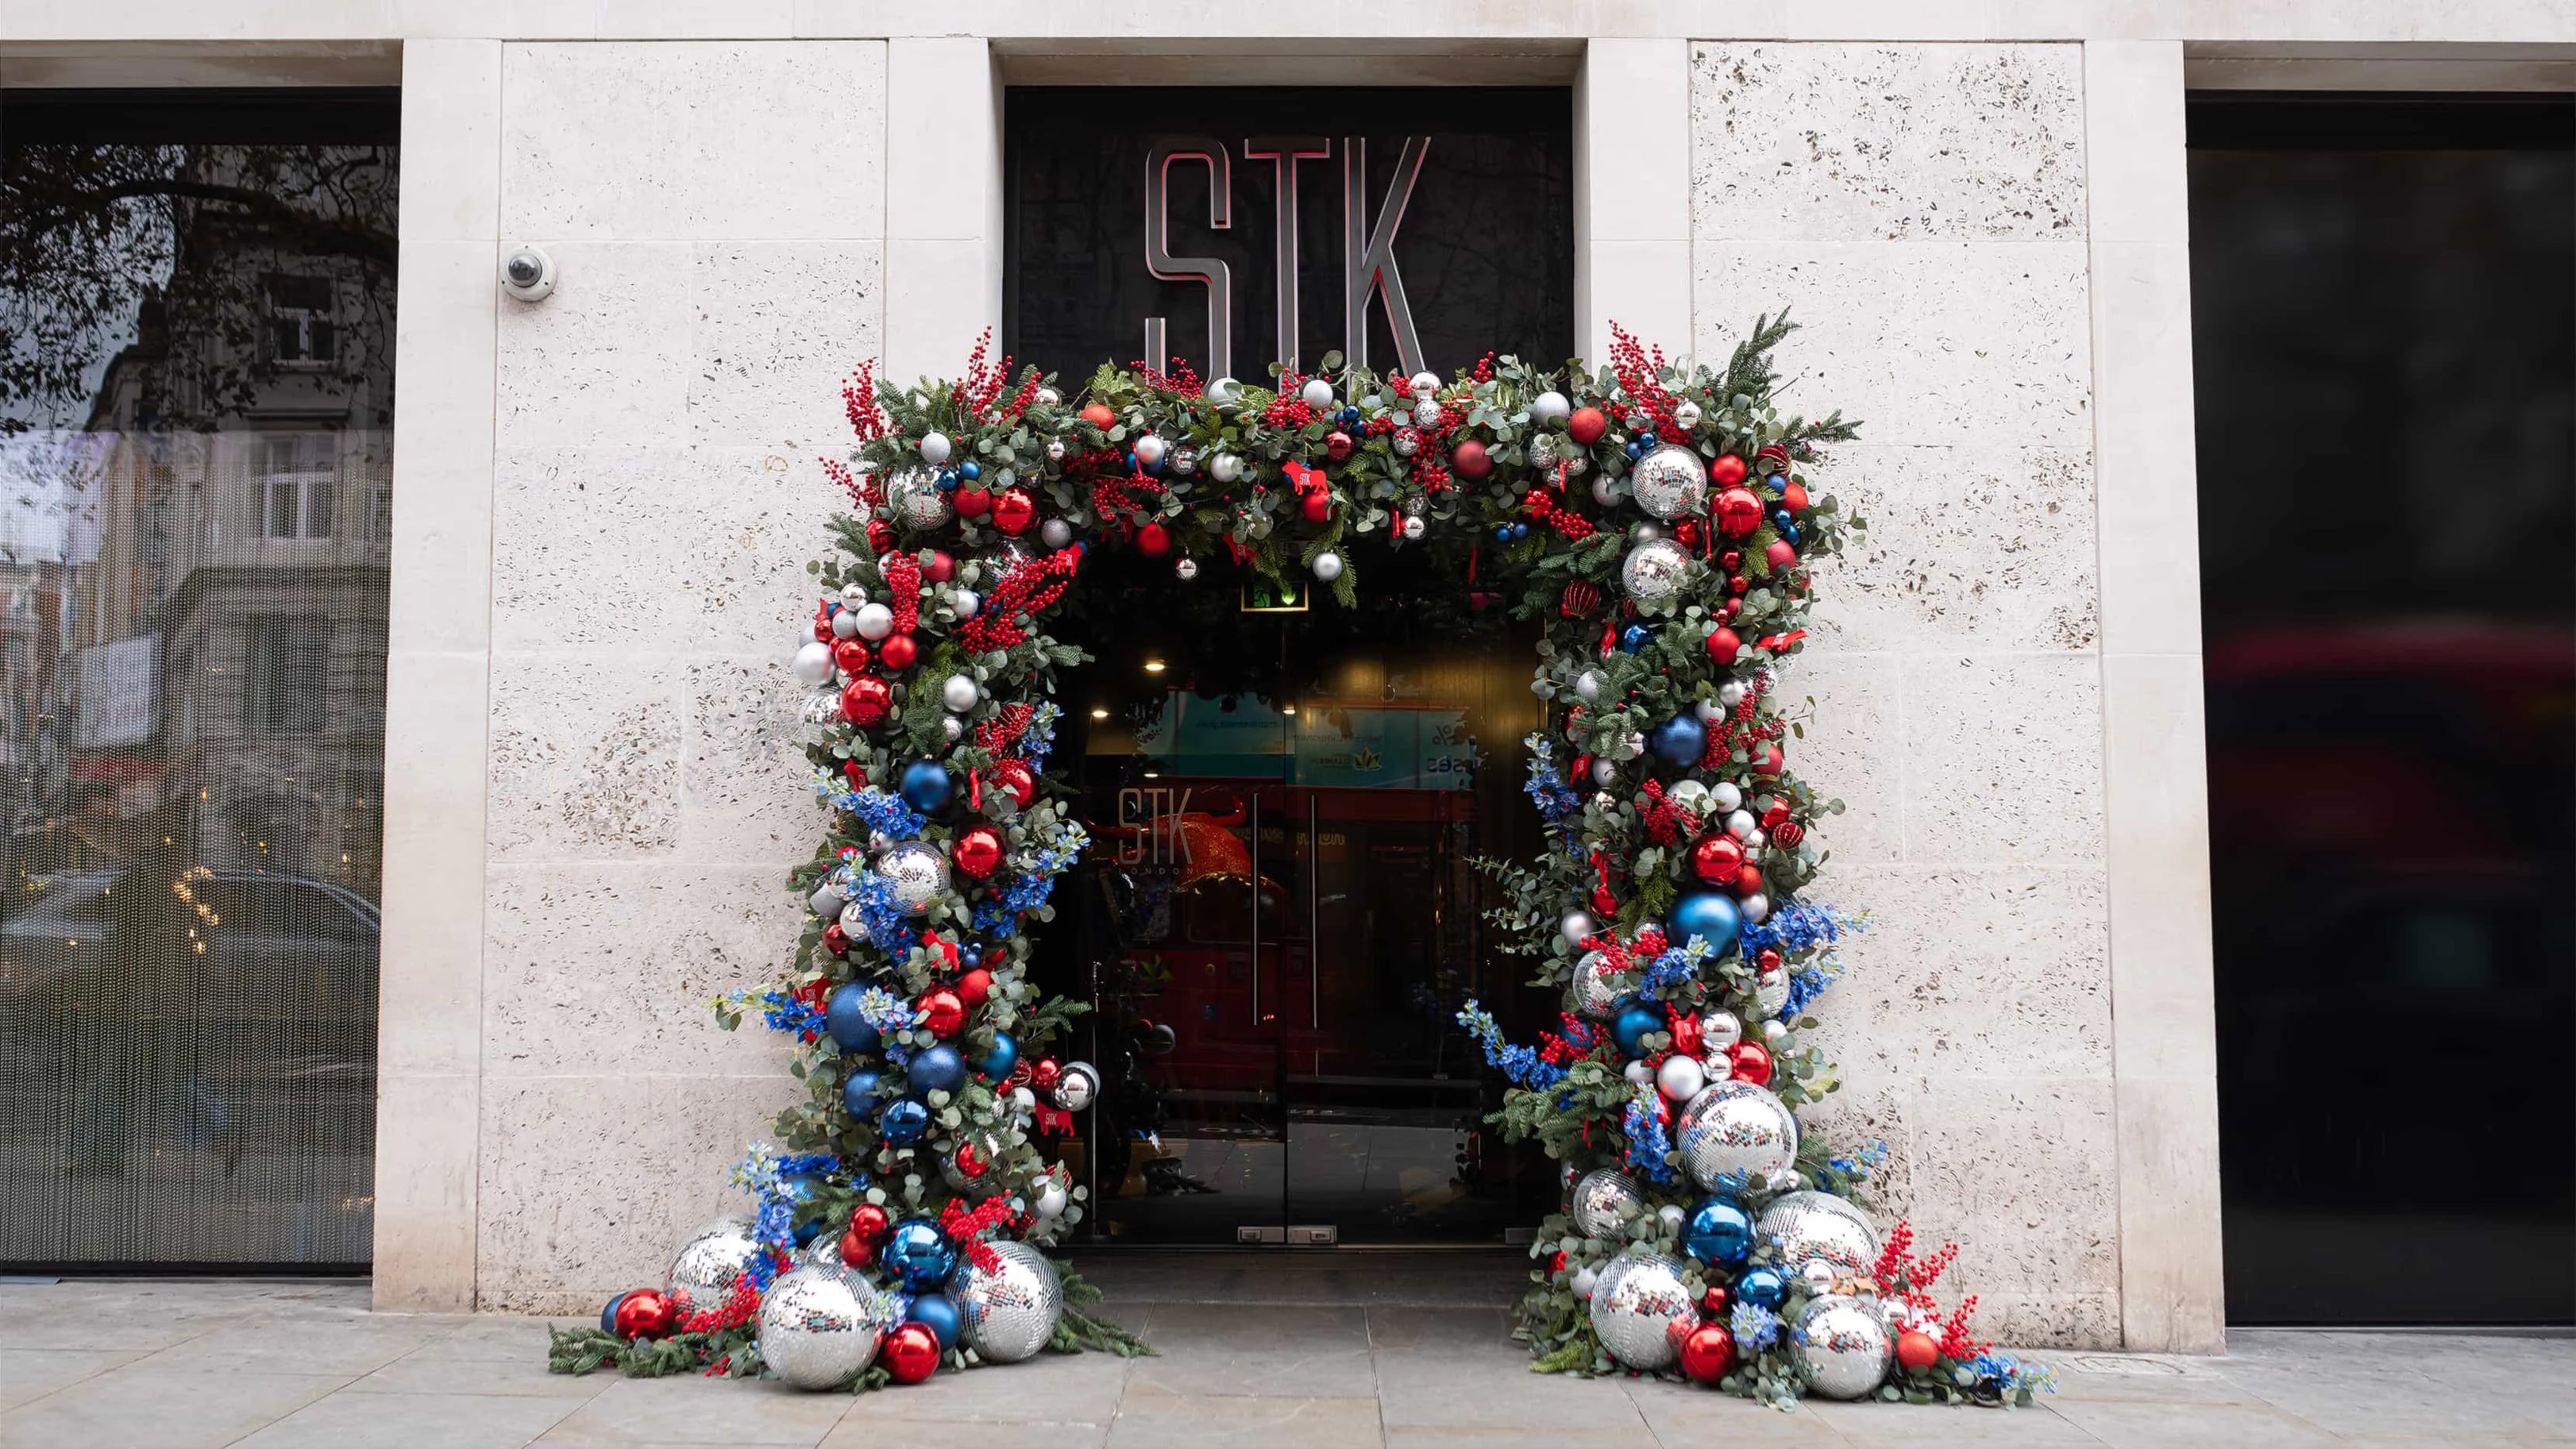 Entrance of STK Steakhouse in London, adorned with an elaborate Christmas floral archway, featuring a vibrant mix of red and blue baubles, silver ornaments, and lush greenery.